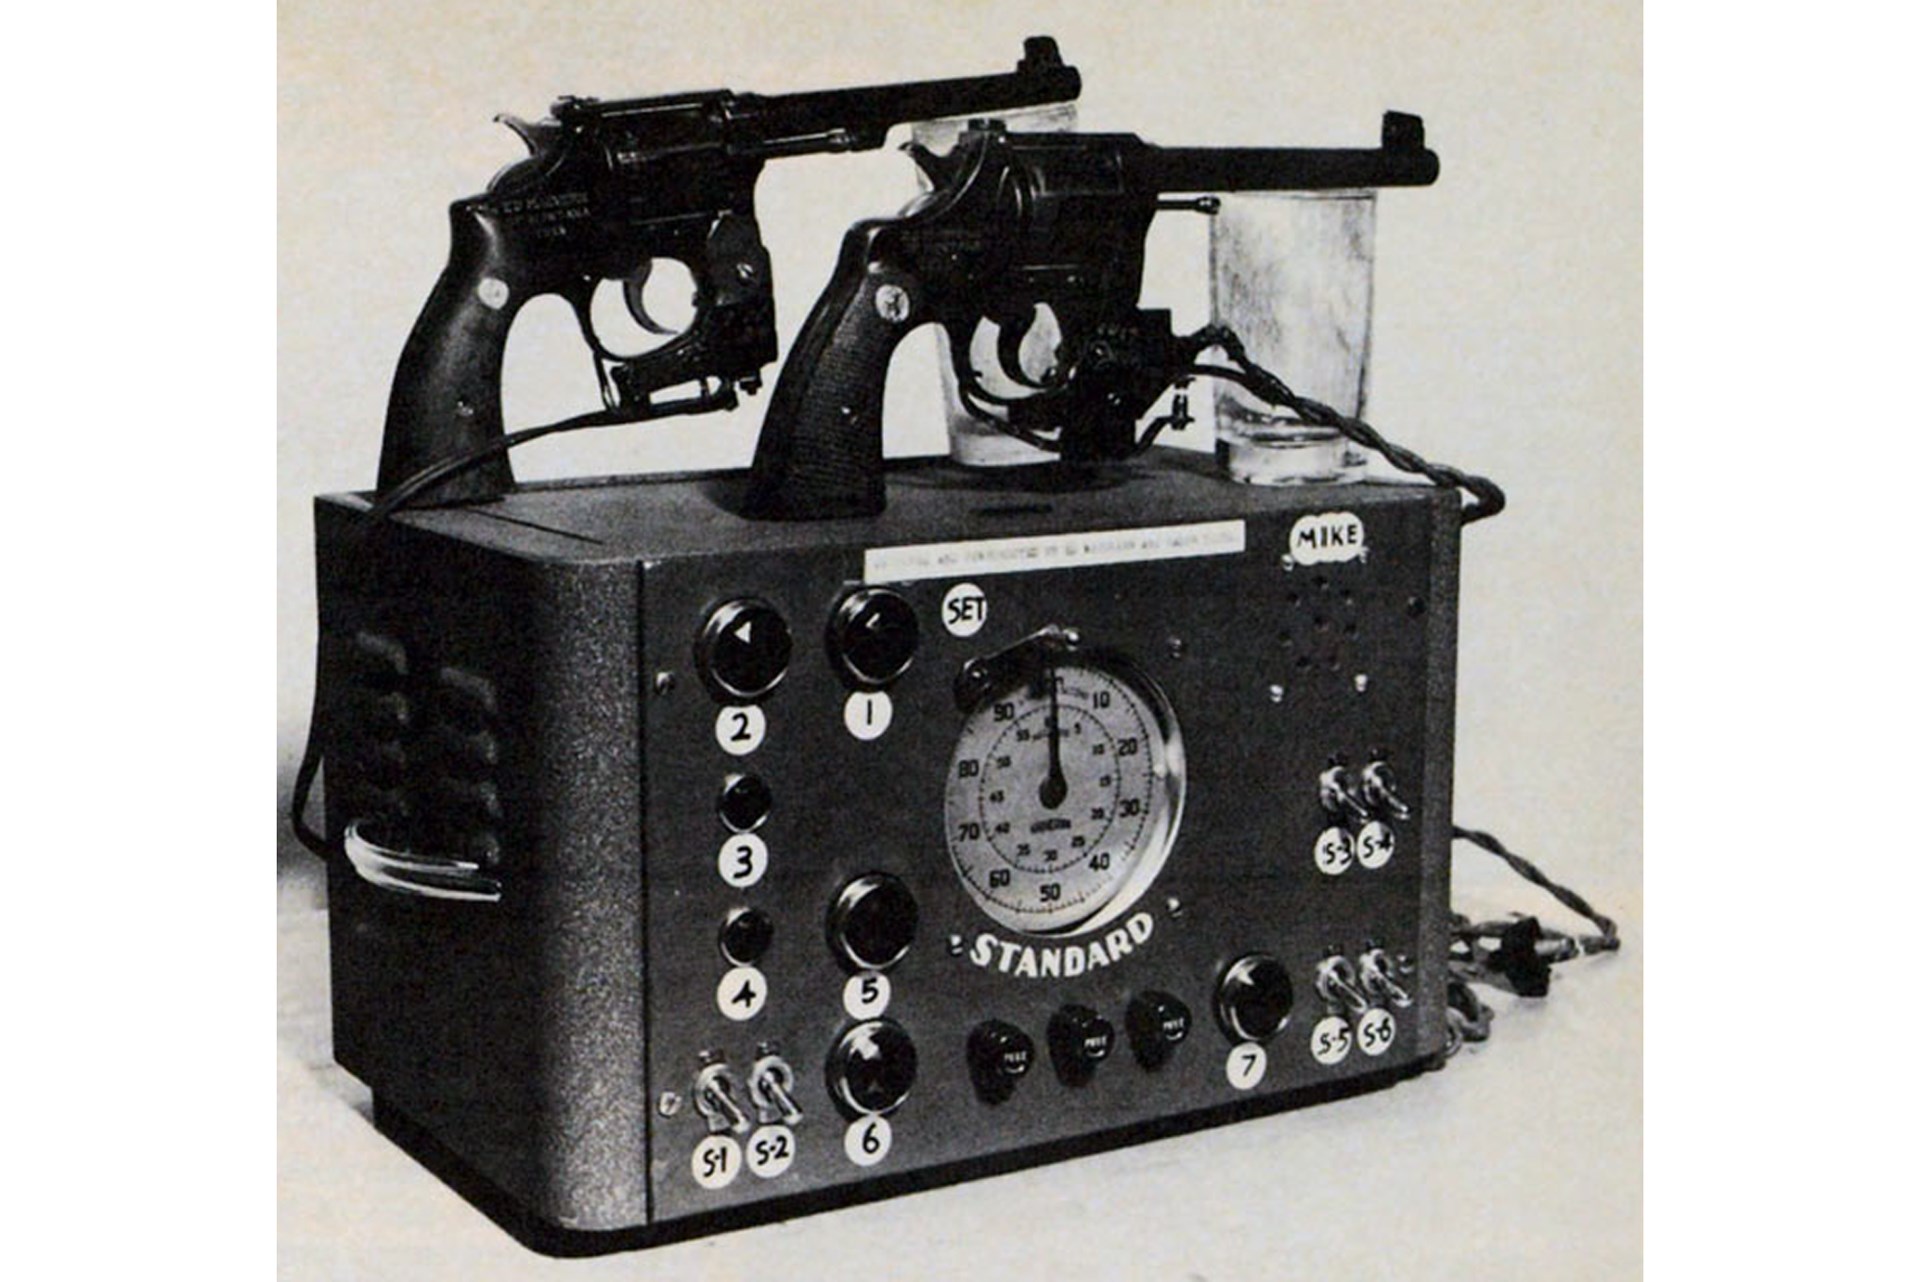 Elaborate timing device was a product of McGivern's own ingenuity. Providing measurements in increments down to 1/20 second, its accuracy was verified by the U.S. Bureau of Standards.